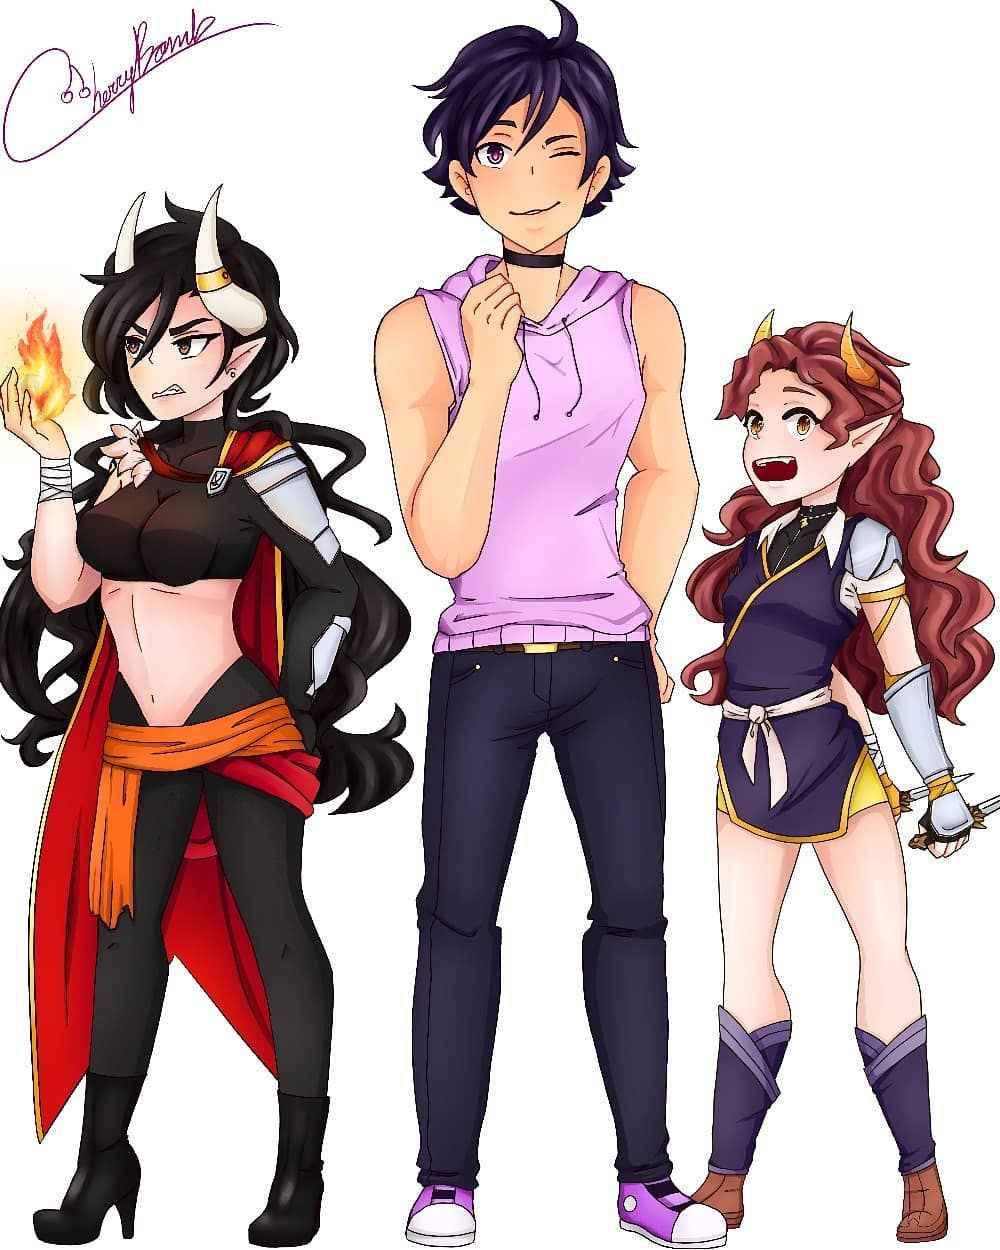 Genderbent Noi, Asch, and Ava. Ava looks like someone I would date